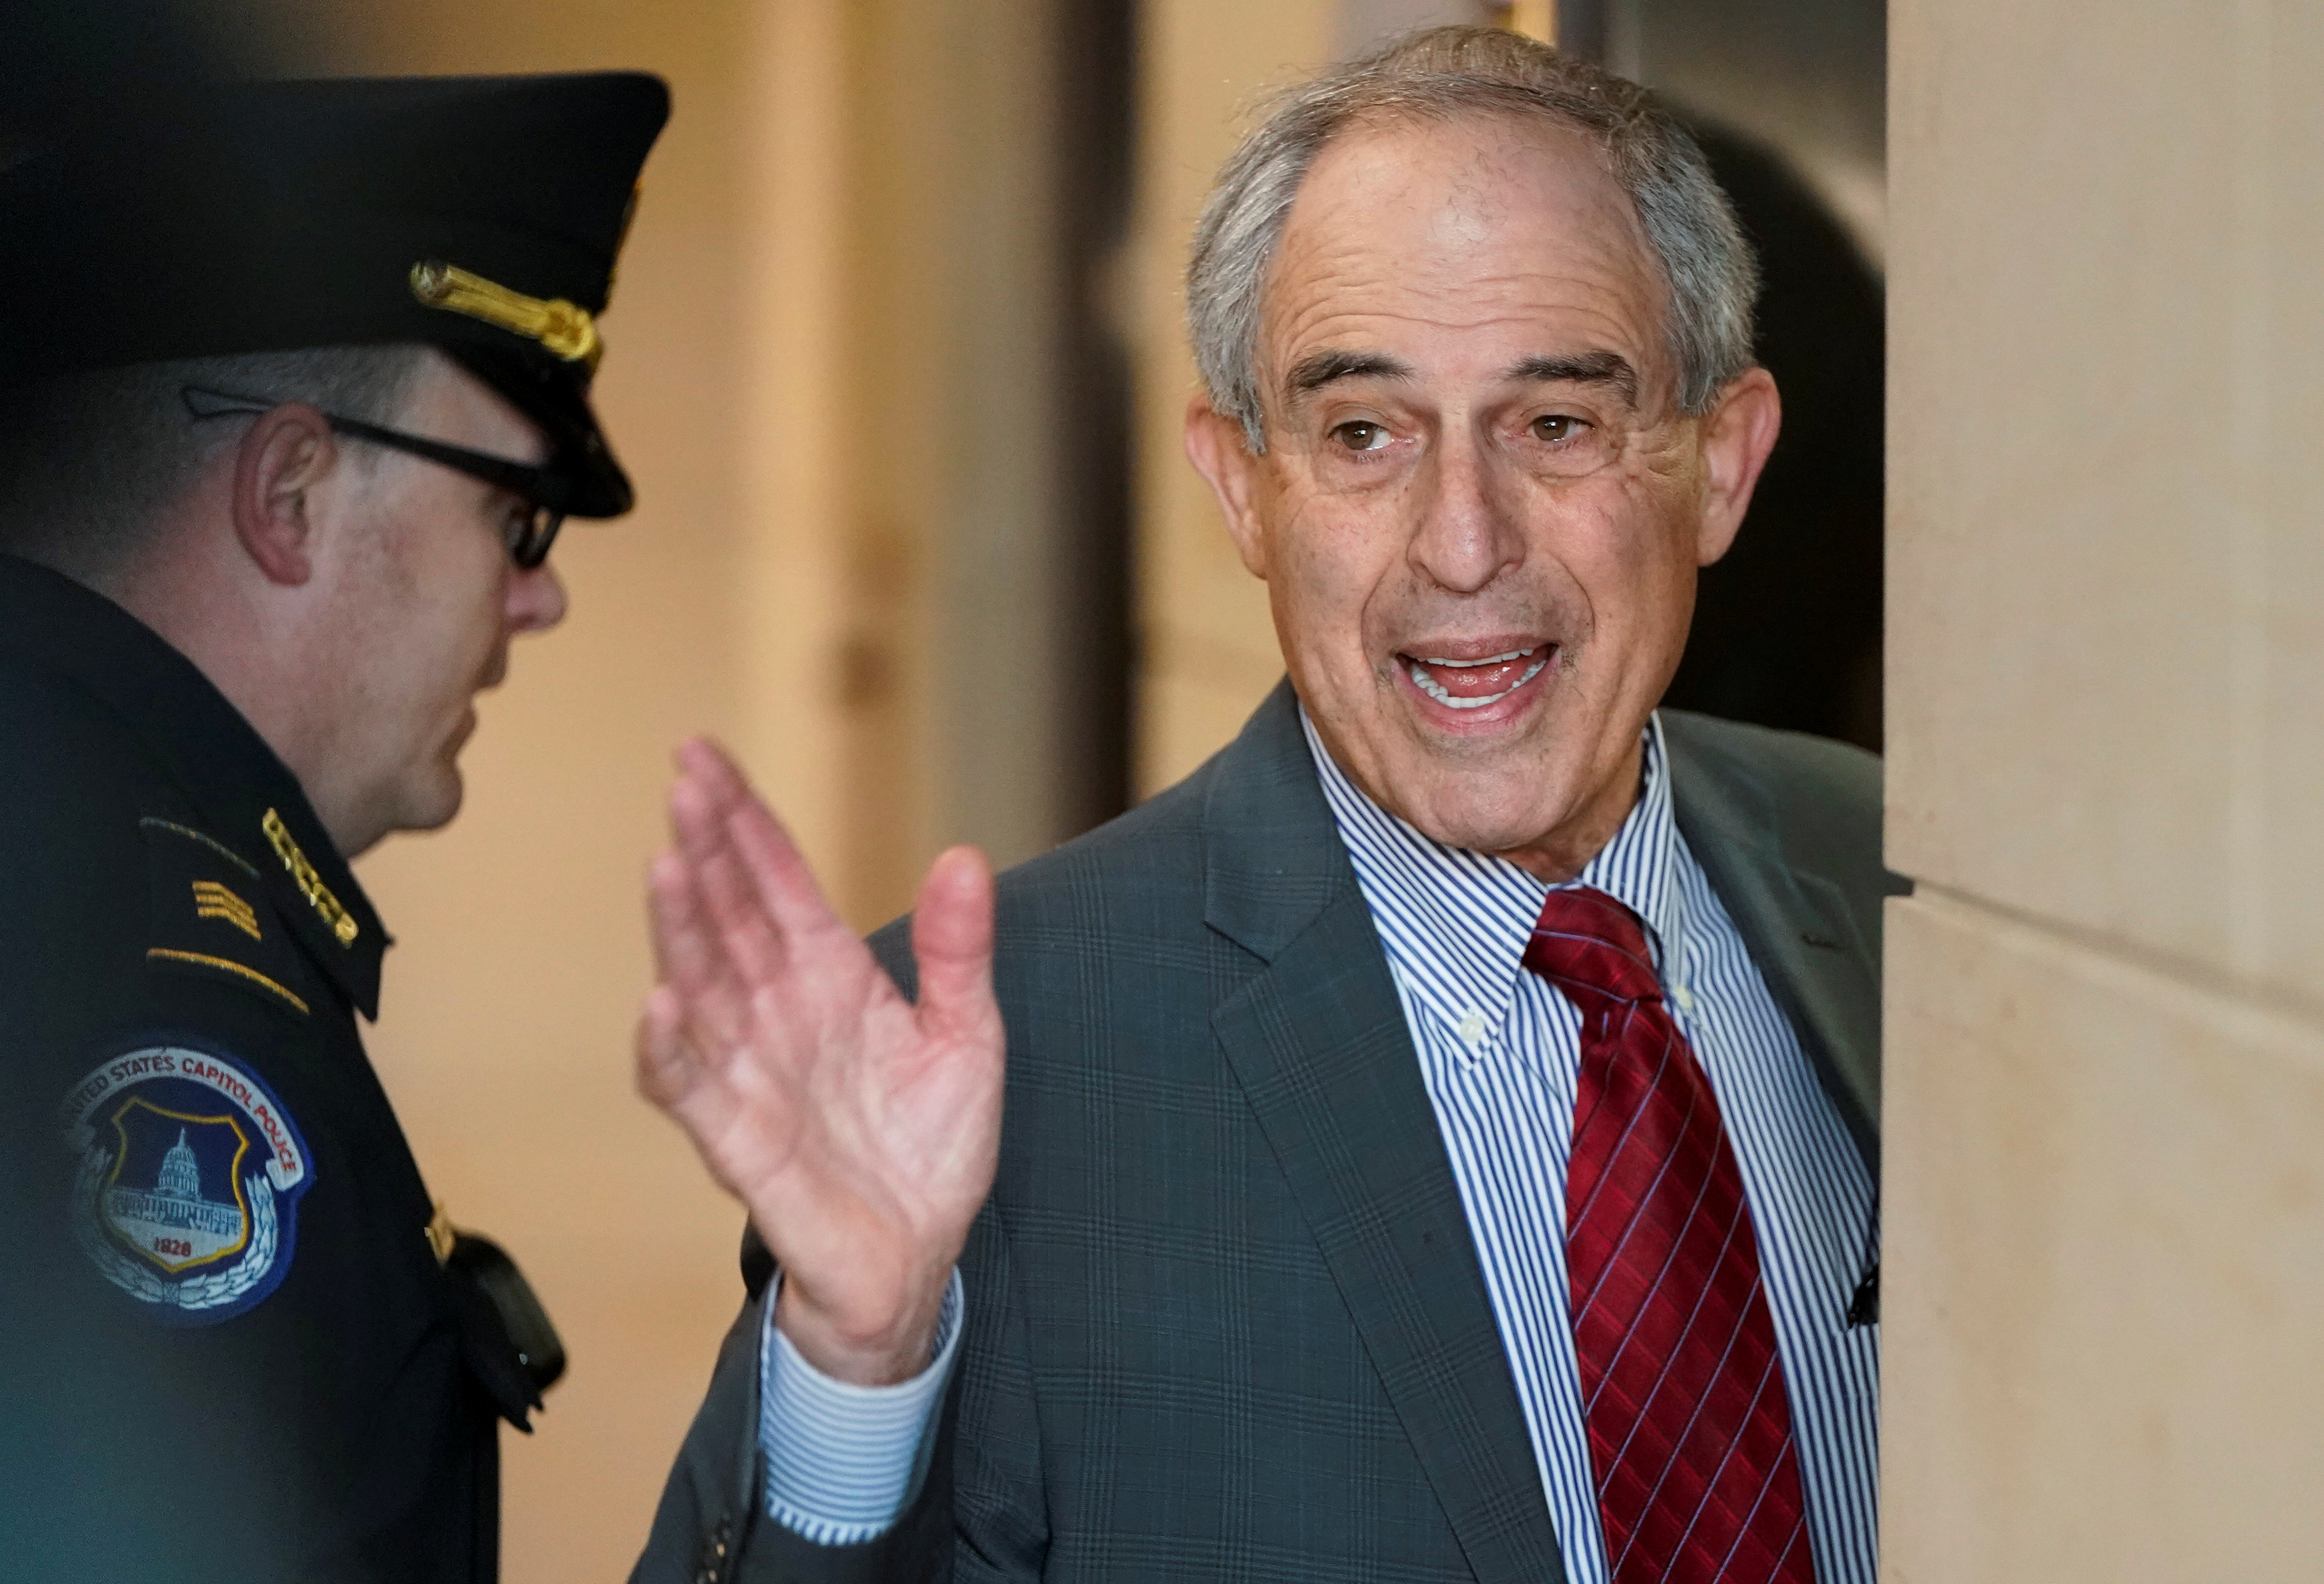 Lanny Davis, attorney for Michael Cohen, the former personal attorney of U.S. President Donald Trump, speaks to the media as Cohen arrives to testify to the House Intelligence Committee on Capitol Hill in Washington